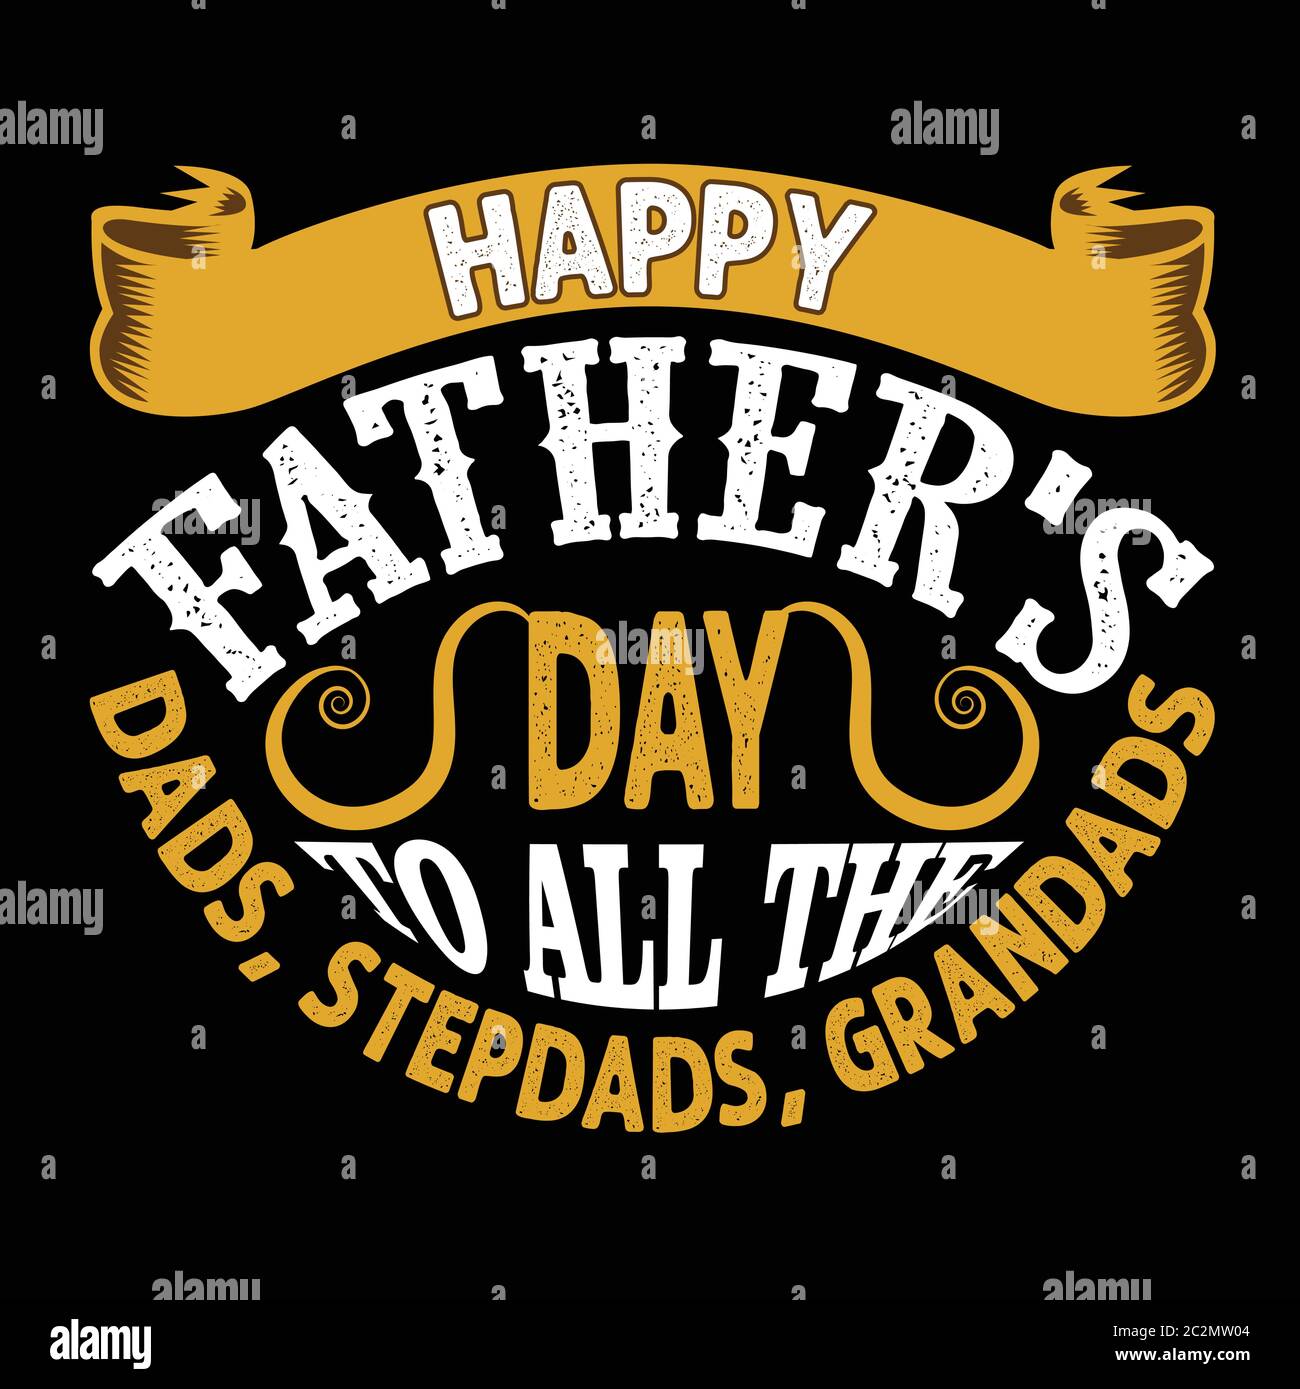 Happy Father s Day To All The Dads, Step dads, Grandads. Fathers ...